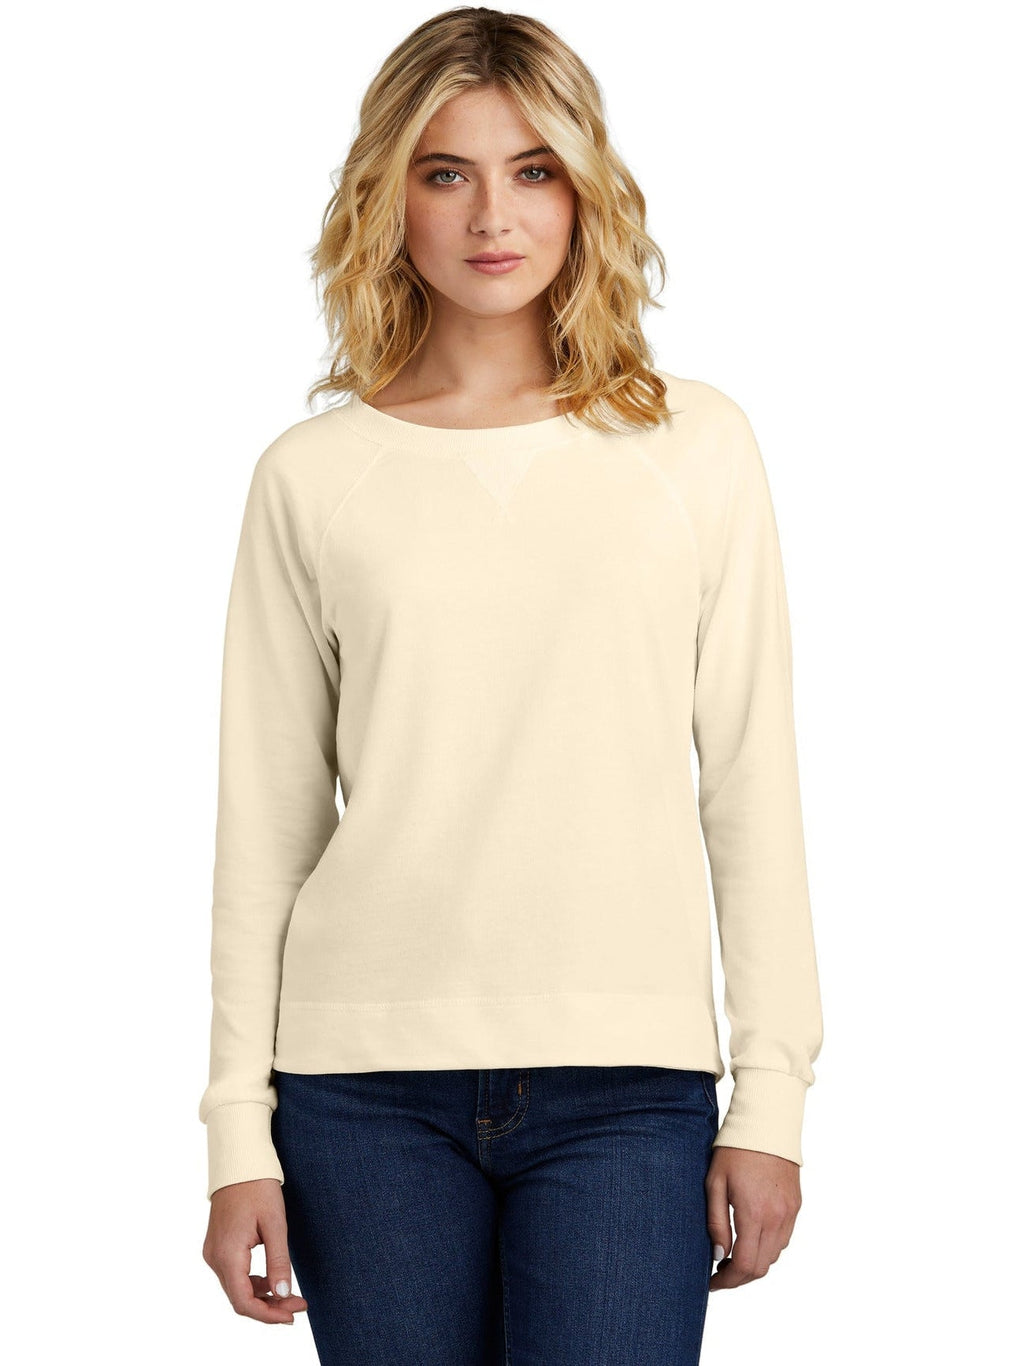 District Women's Featherweight French Terry Long Sleeve Crewneck, Product